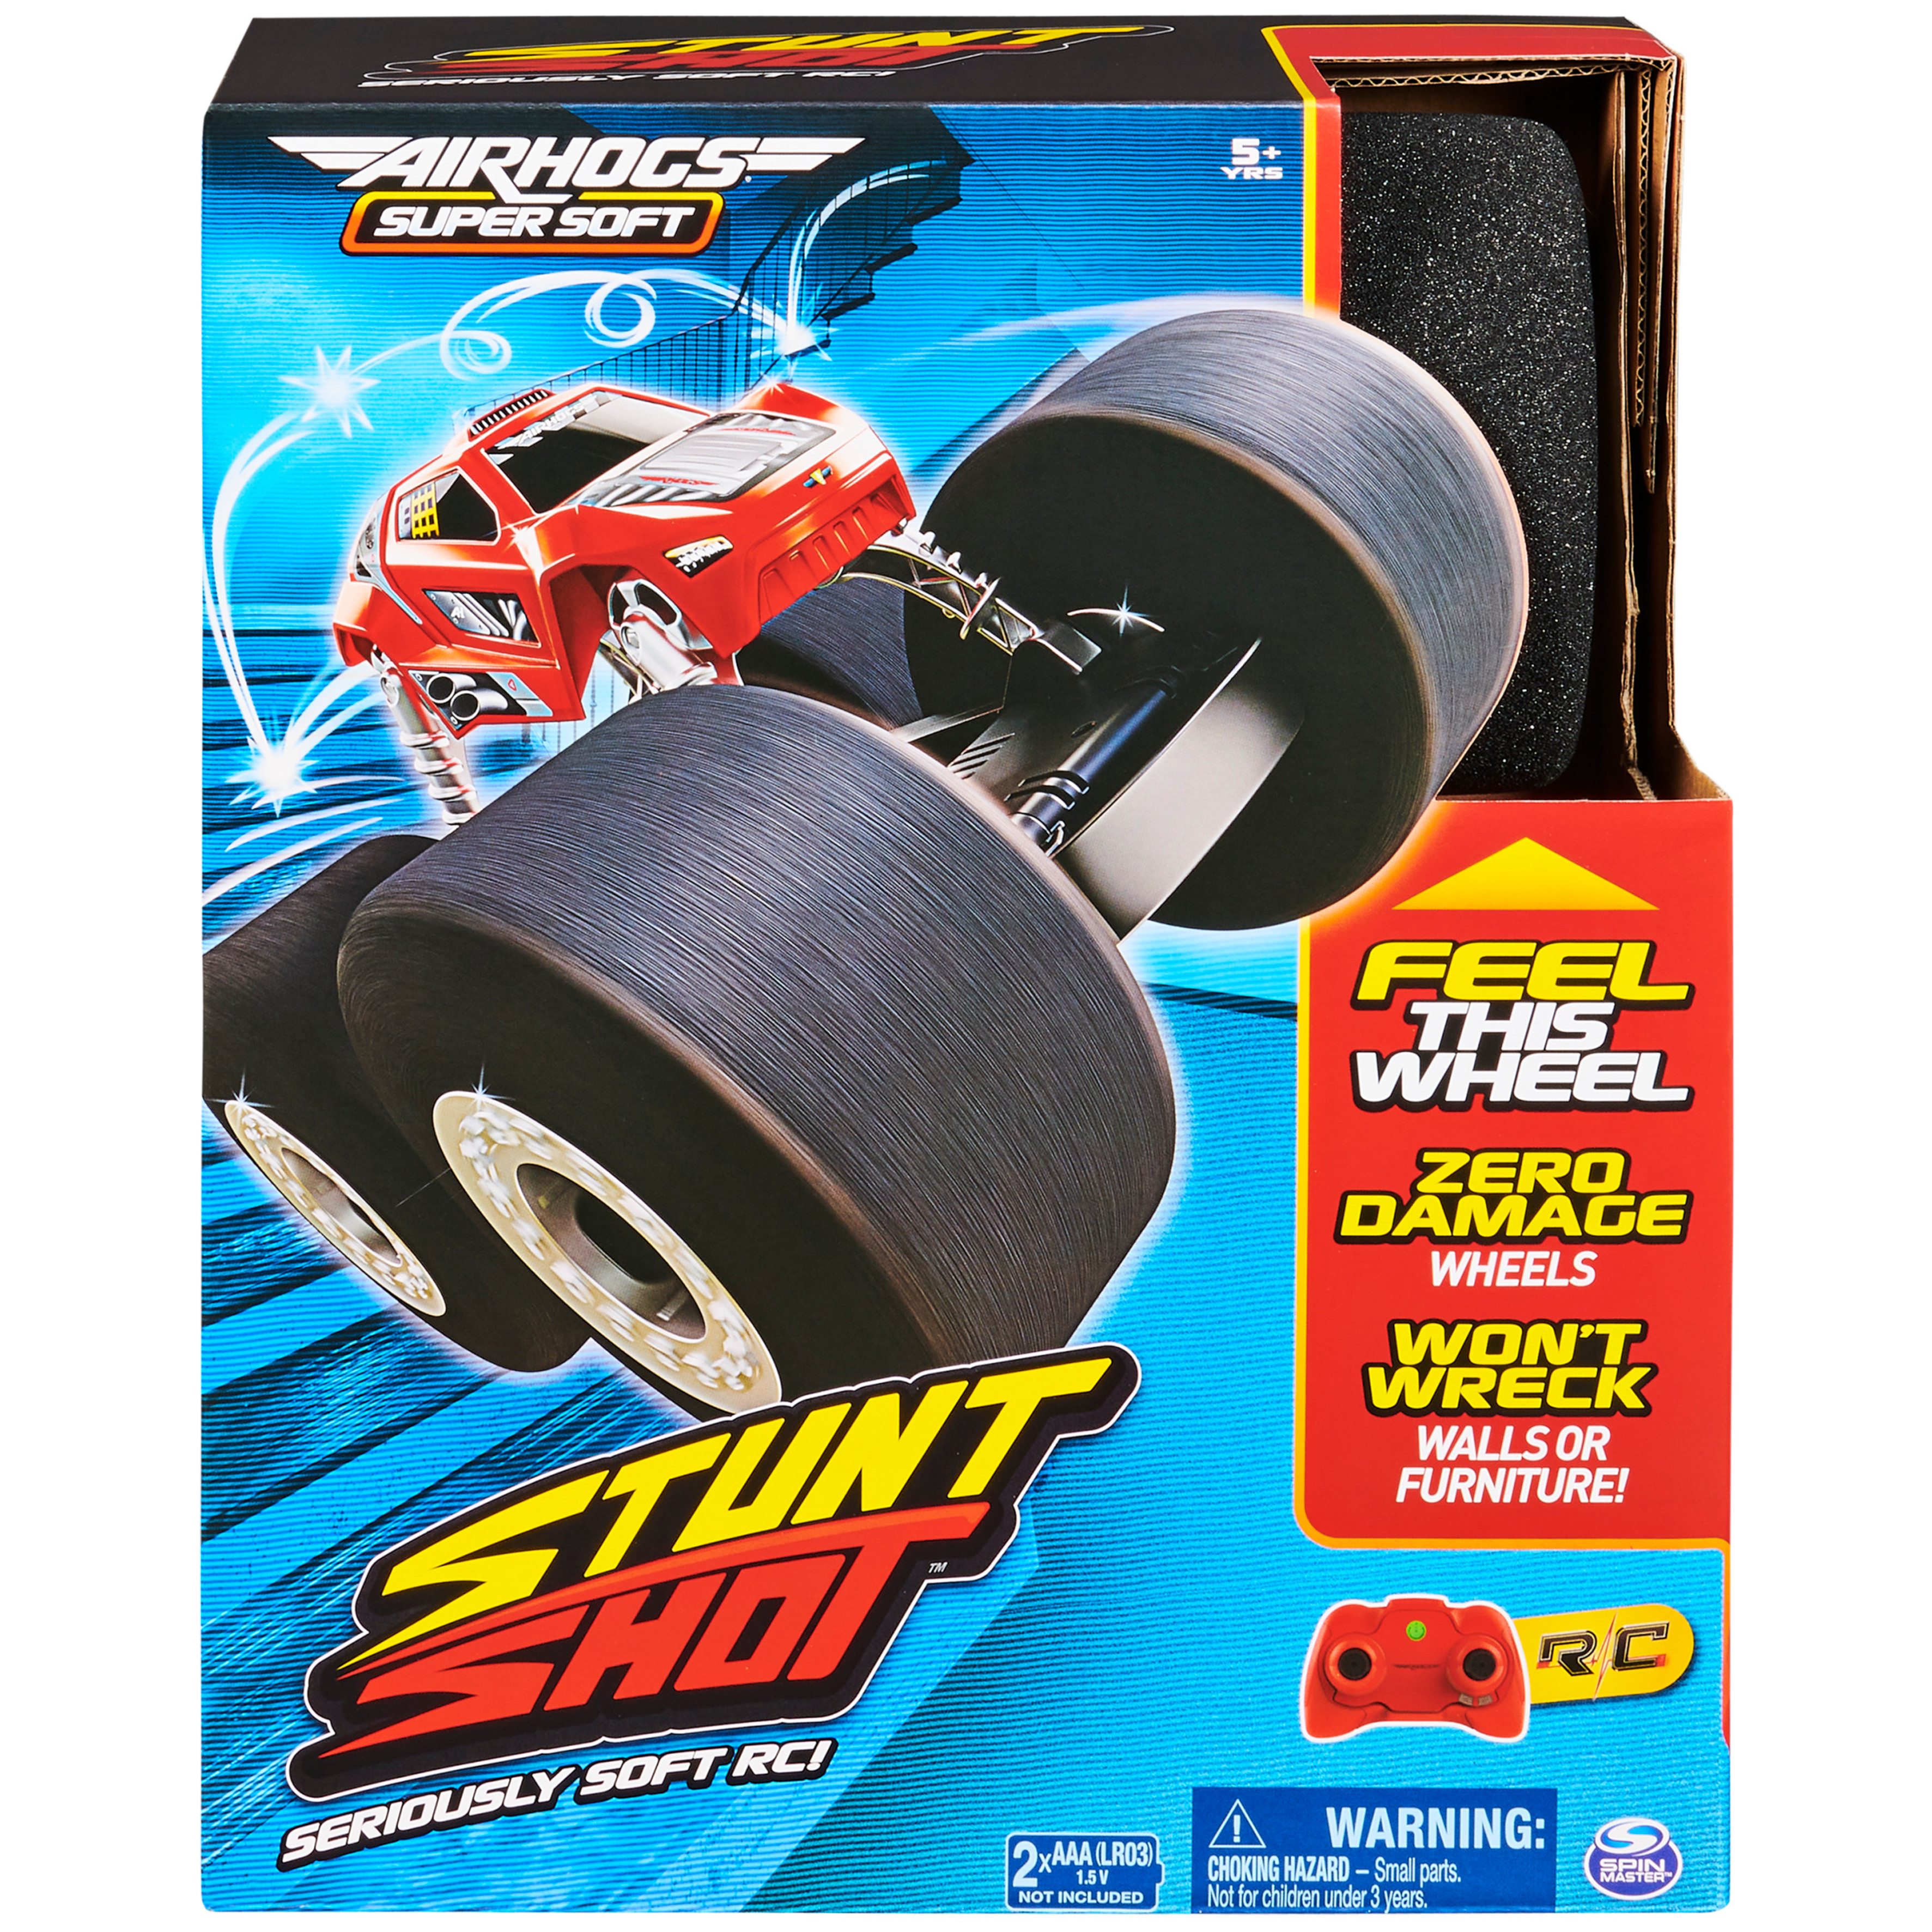 Air Hogs Super Soft, Stunt Shot Indoor Remote Control Stunt Vehicle with Soft Wheels, for Kids Aged 5 and up - image 3 of 10